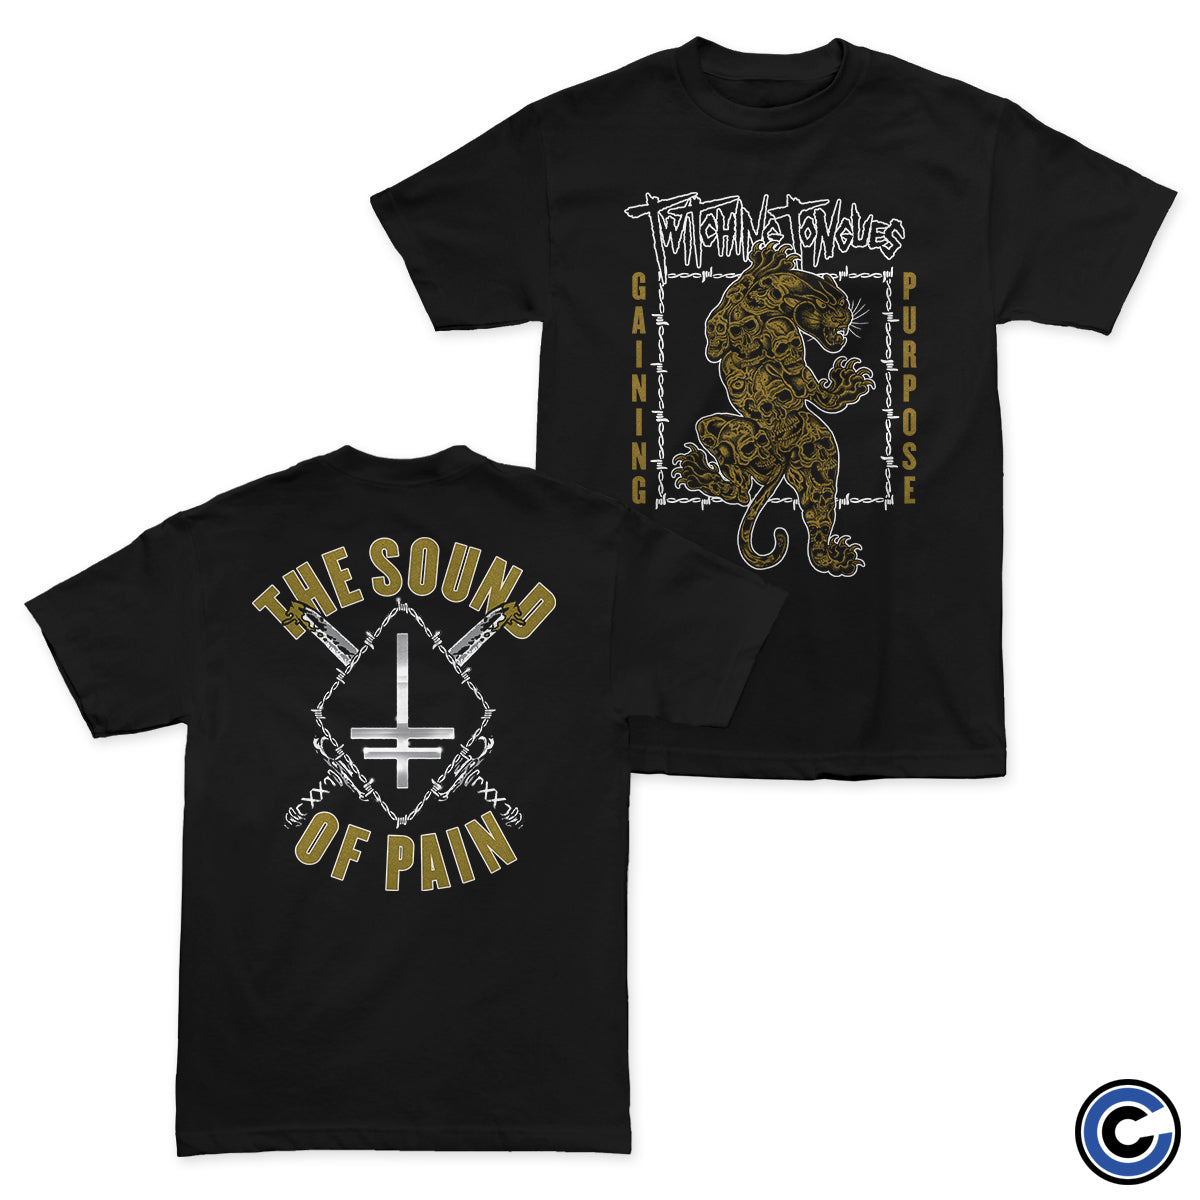 Twitching Tongues "The Sound Of Pain" Shirt